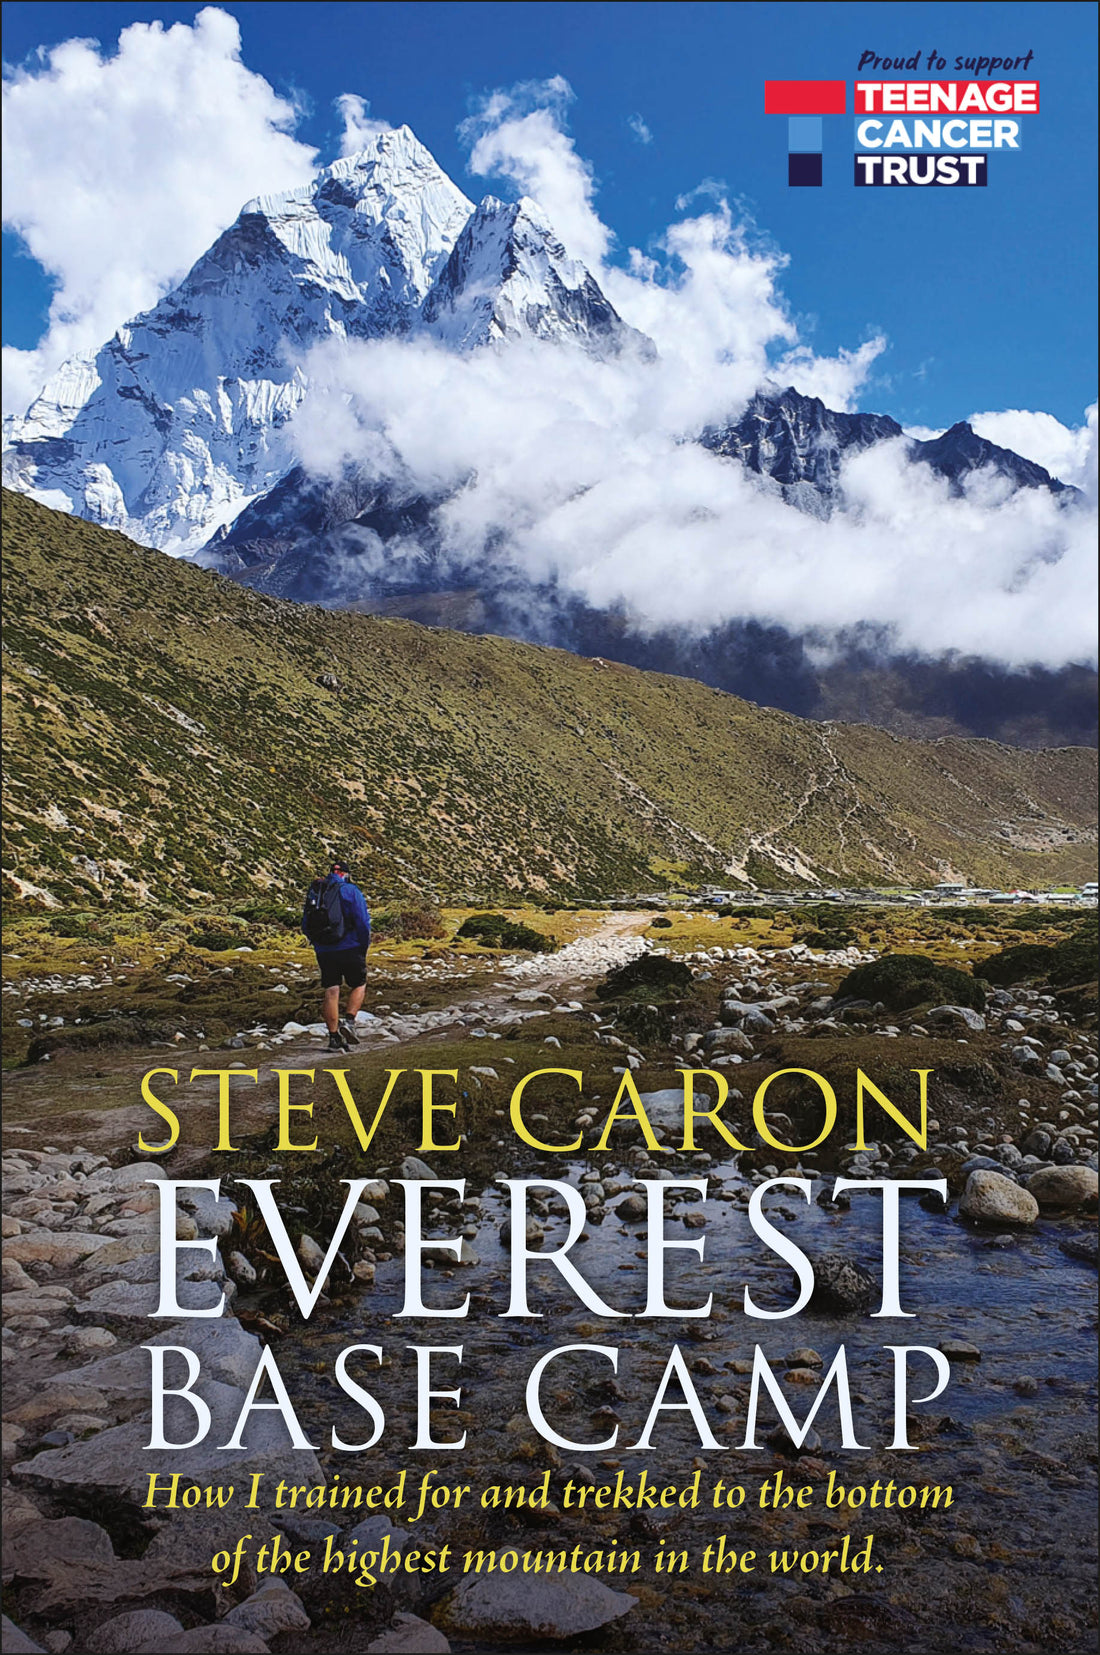 Everest Base Camp - Quotes from the book